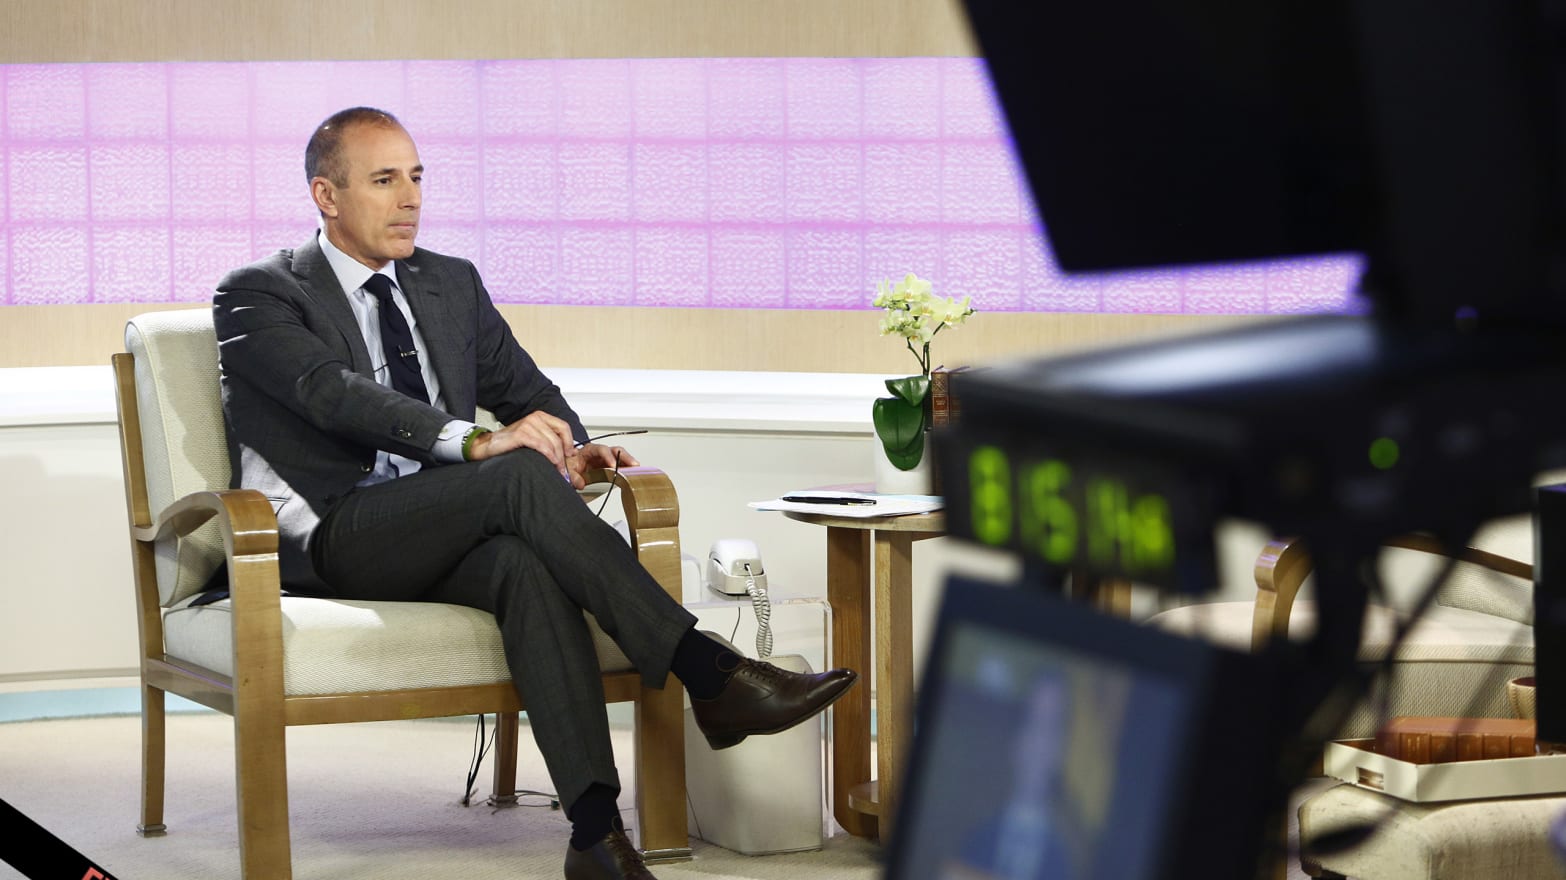 Matt Lauer's Bruising Year After Ann Curry's Ouster Devastated theToday Show